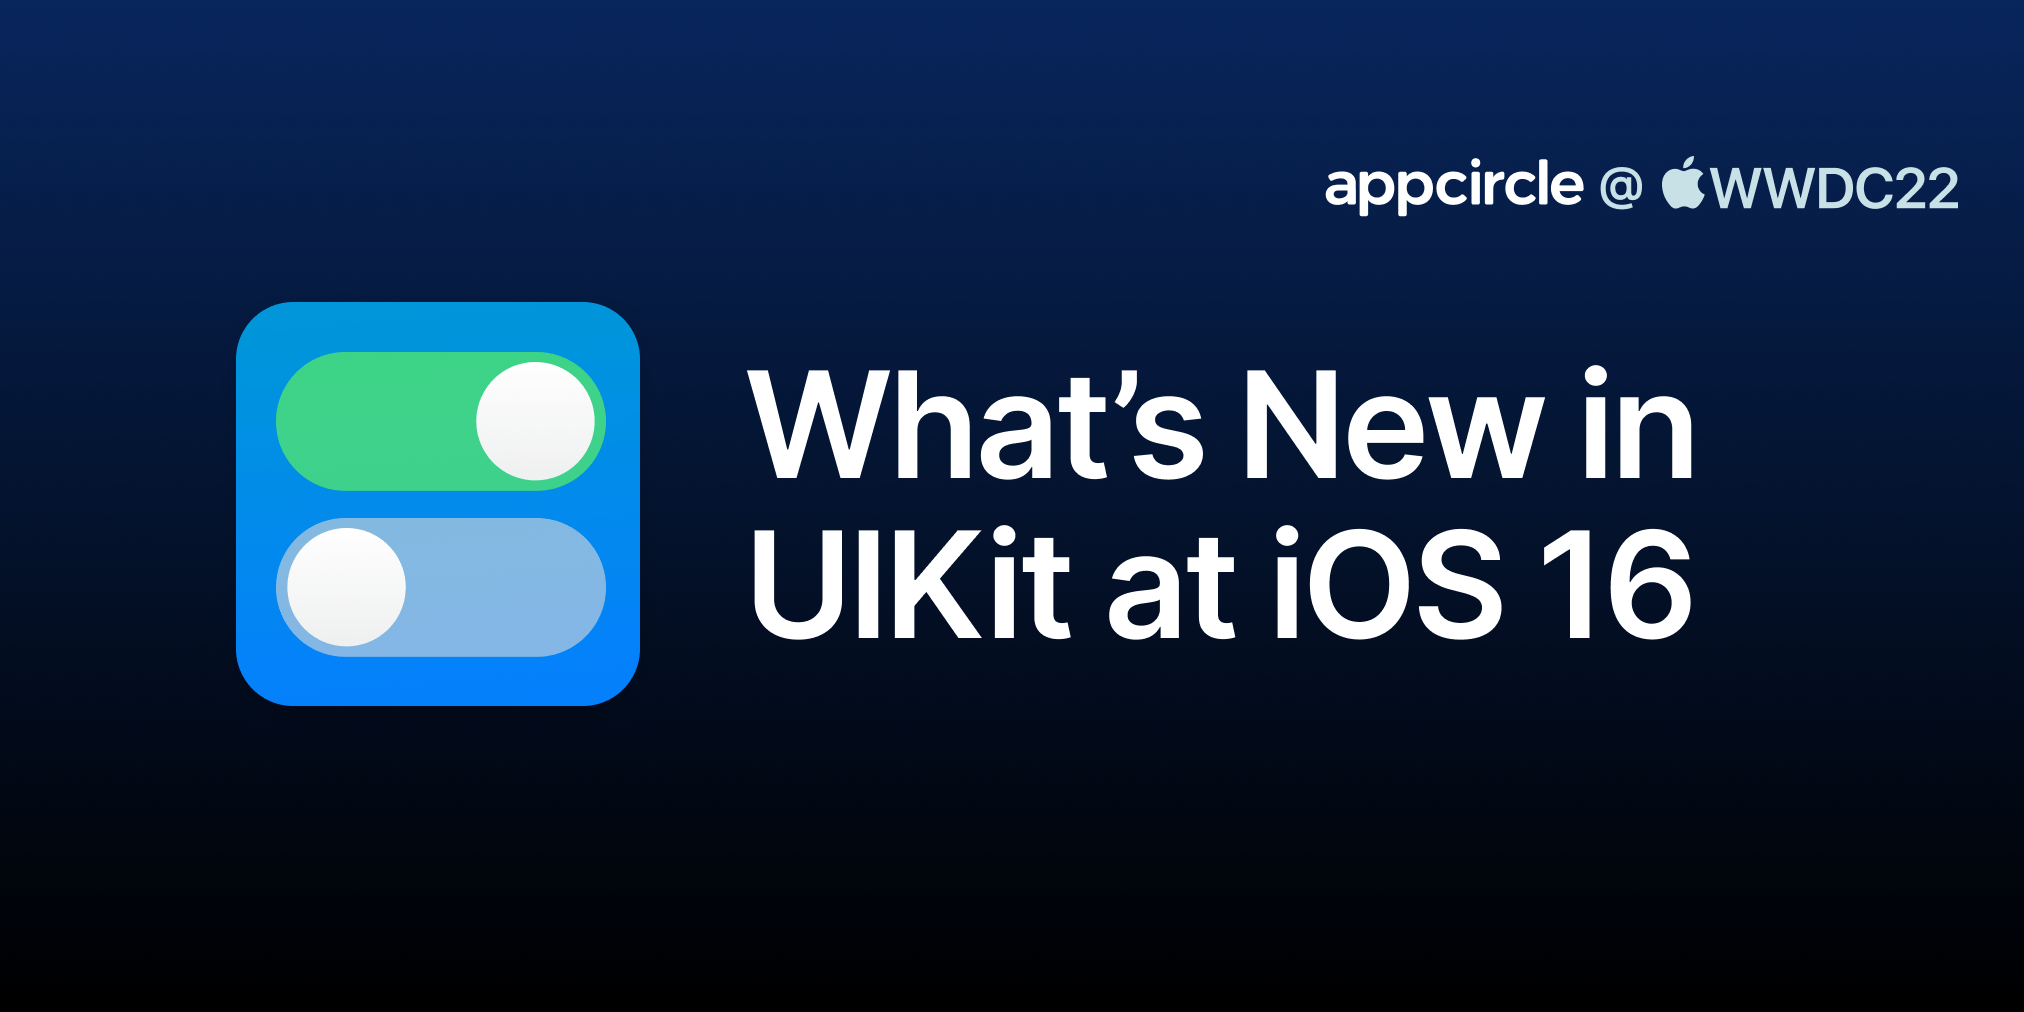 What’s New in UIKit at iOS 16, WWDC22